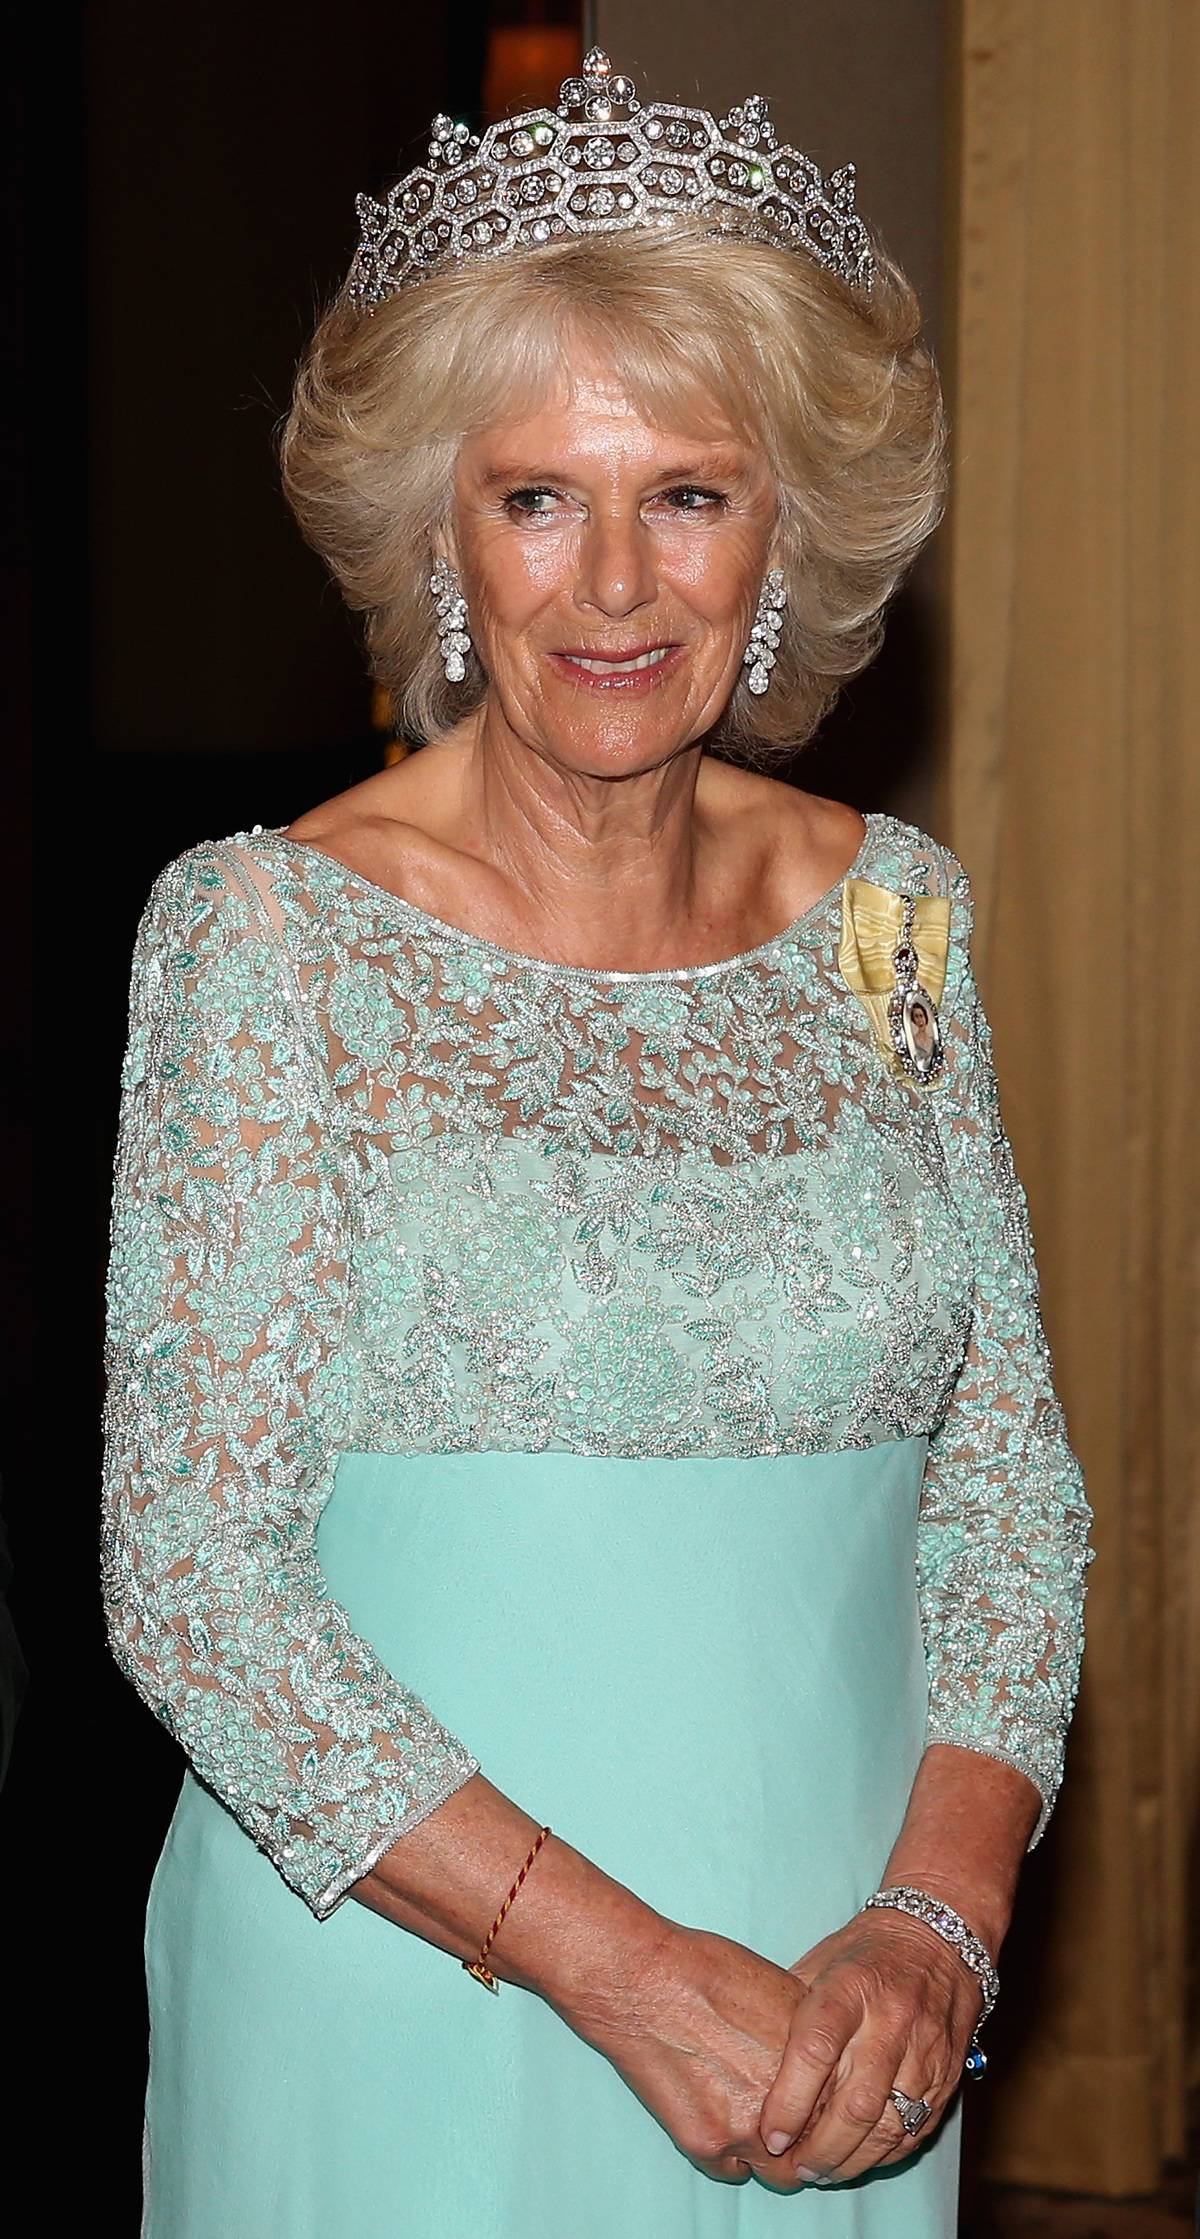 <p>This honeycomb-style tiara, called the <a href="https://www.tatler.com/article/royal-family-jewellery-boucheron-the-queen-duchess-of-cornwall-and-princess-eugenie" rel="noopener noreferrer">Boucheron tiara</a>, was a favorite of the late Queen Mothers and is a favorite of Queen Camilla today. With no heirs of her own, it was bequeathed to the Queen Mother by wealthy socialite and brewery heiress Margaret Greville in 2002, along with all her other rare jewels.</p> <p>Made by Boucheron, it's one of the sparkliest tiaras in the royal collection. The Queen Mother upped the bling on this tiara and had it made even larger, asking Cartier to add a marquise-shaped diamond in the center.</p>